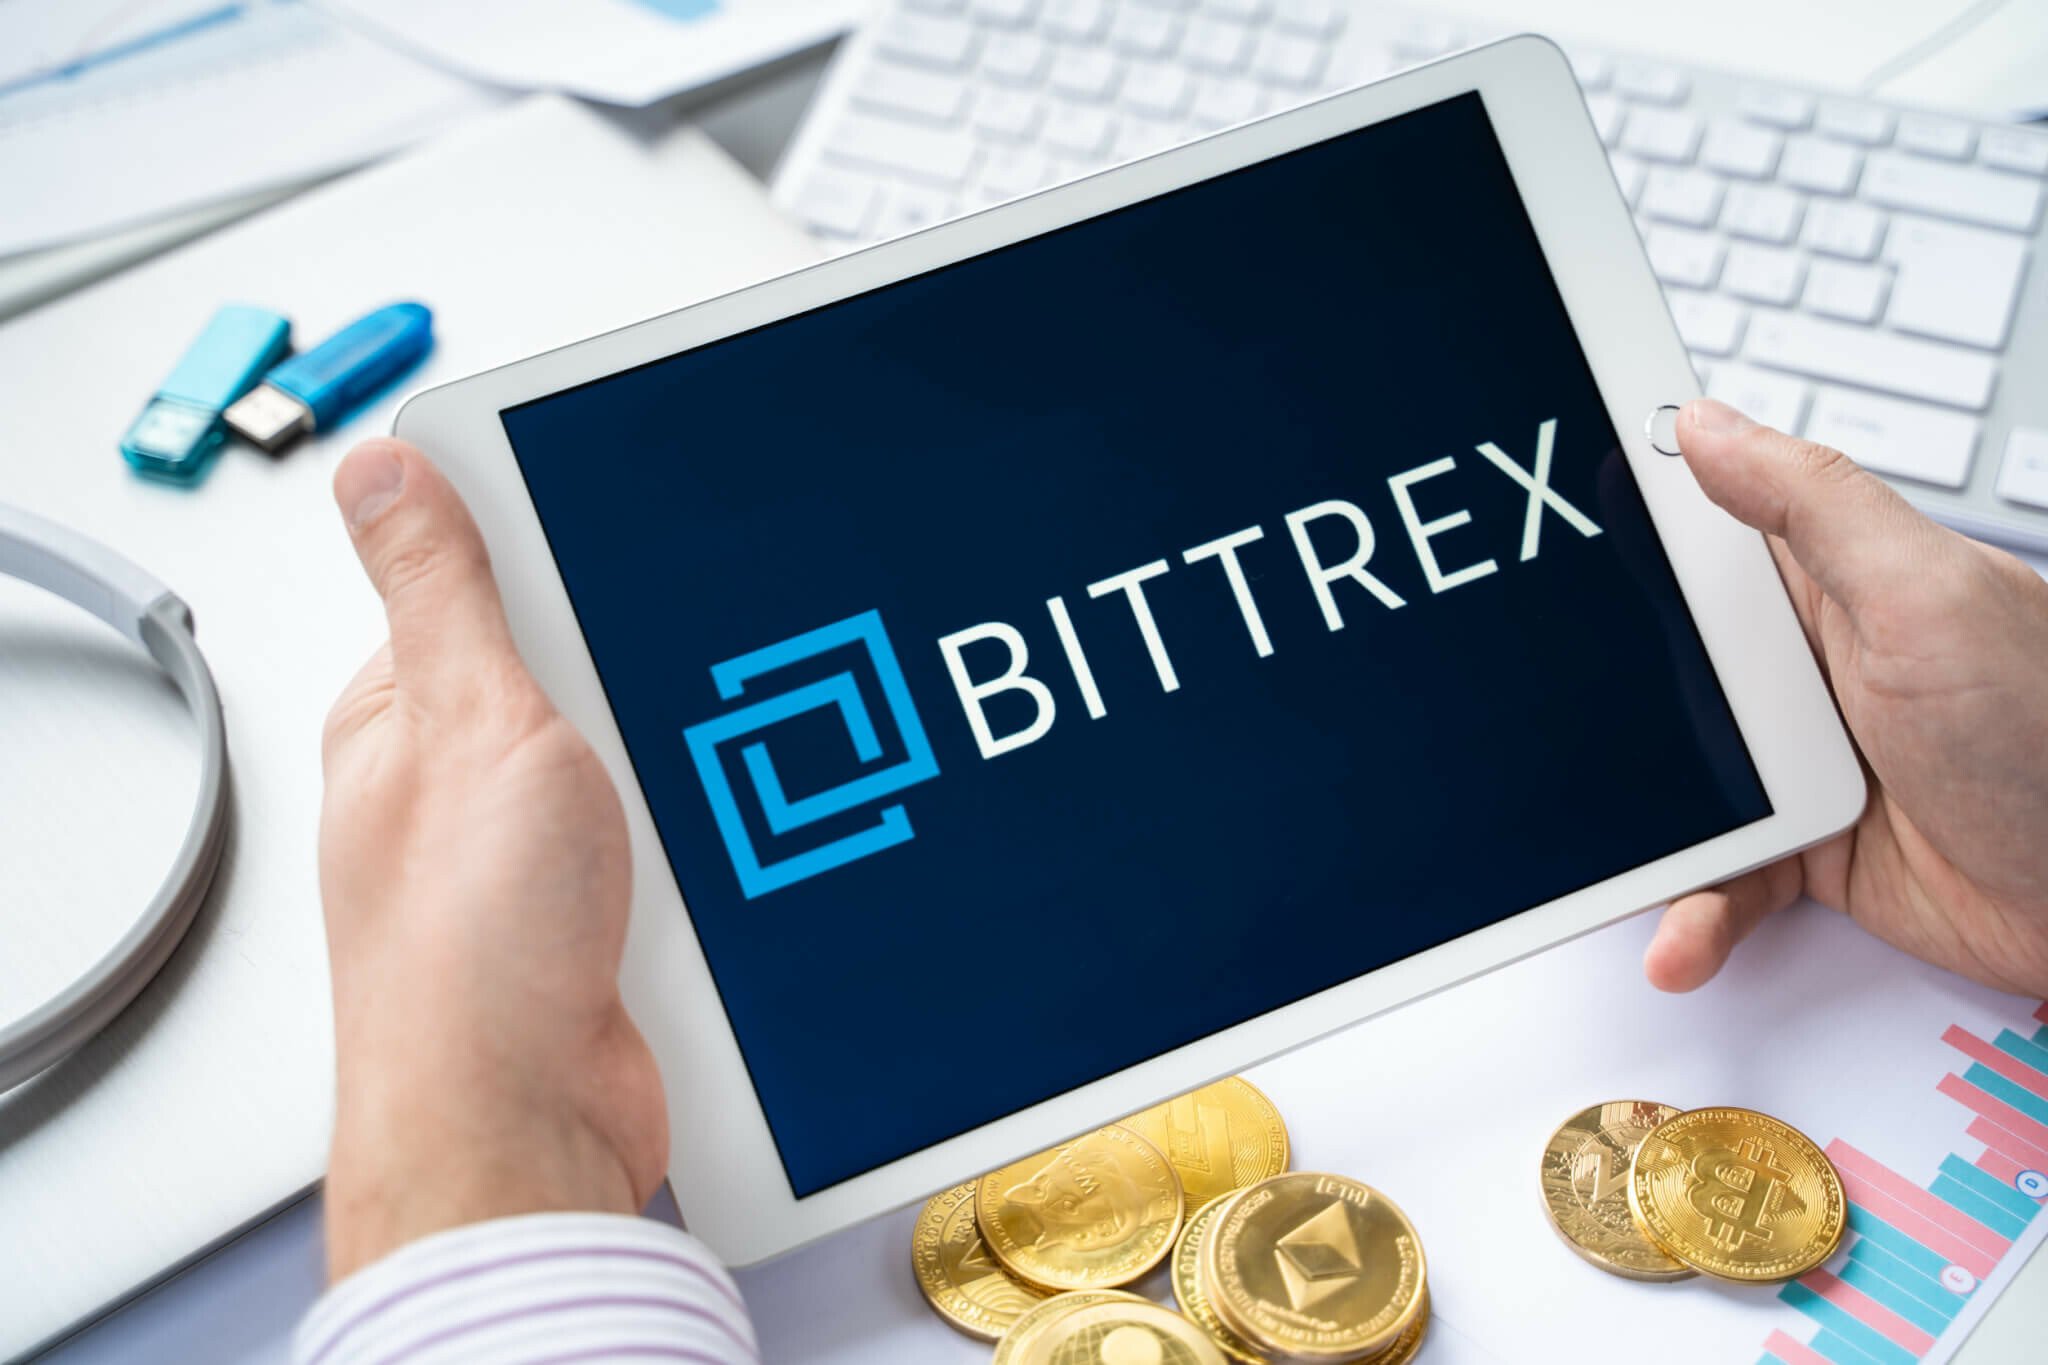 bittrex: Bittrex approved to borrow $7 million bankruptcy loan in bitcoin - The Economic Times